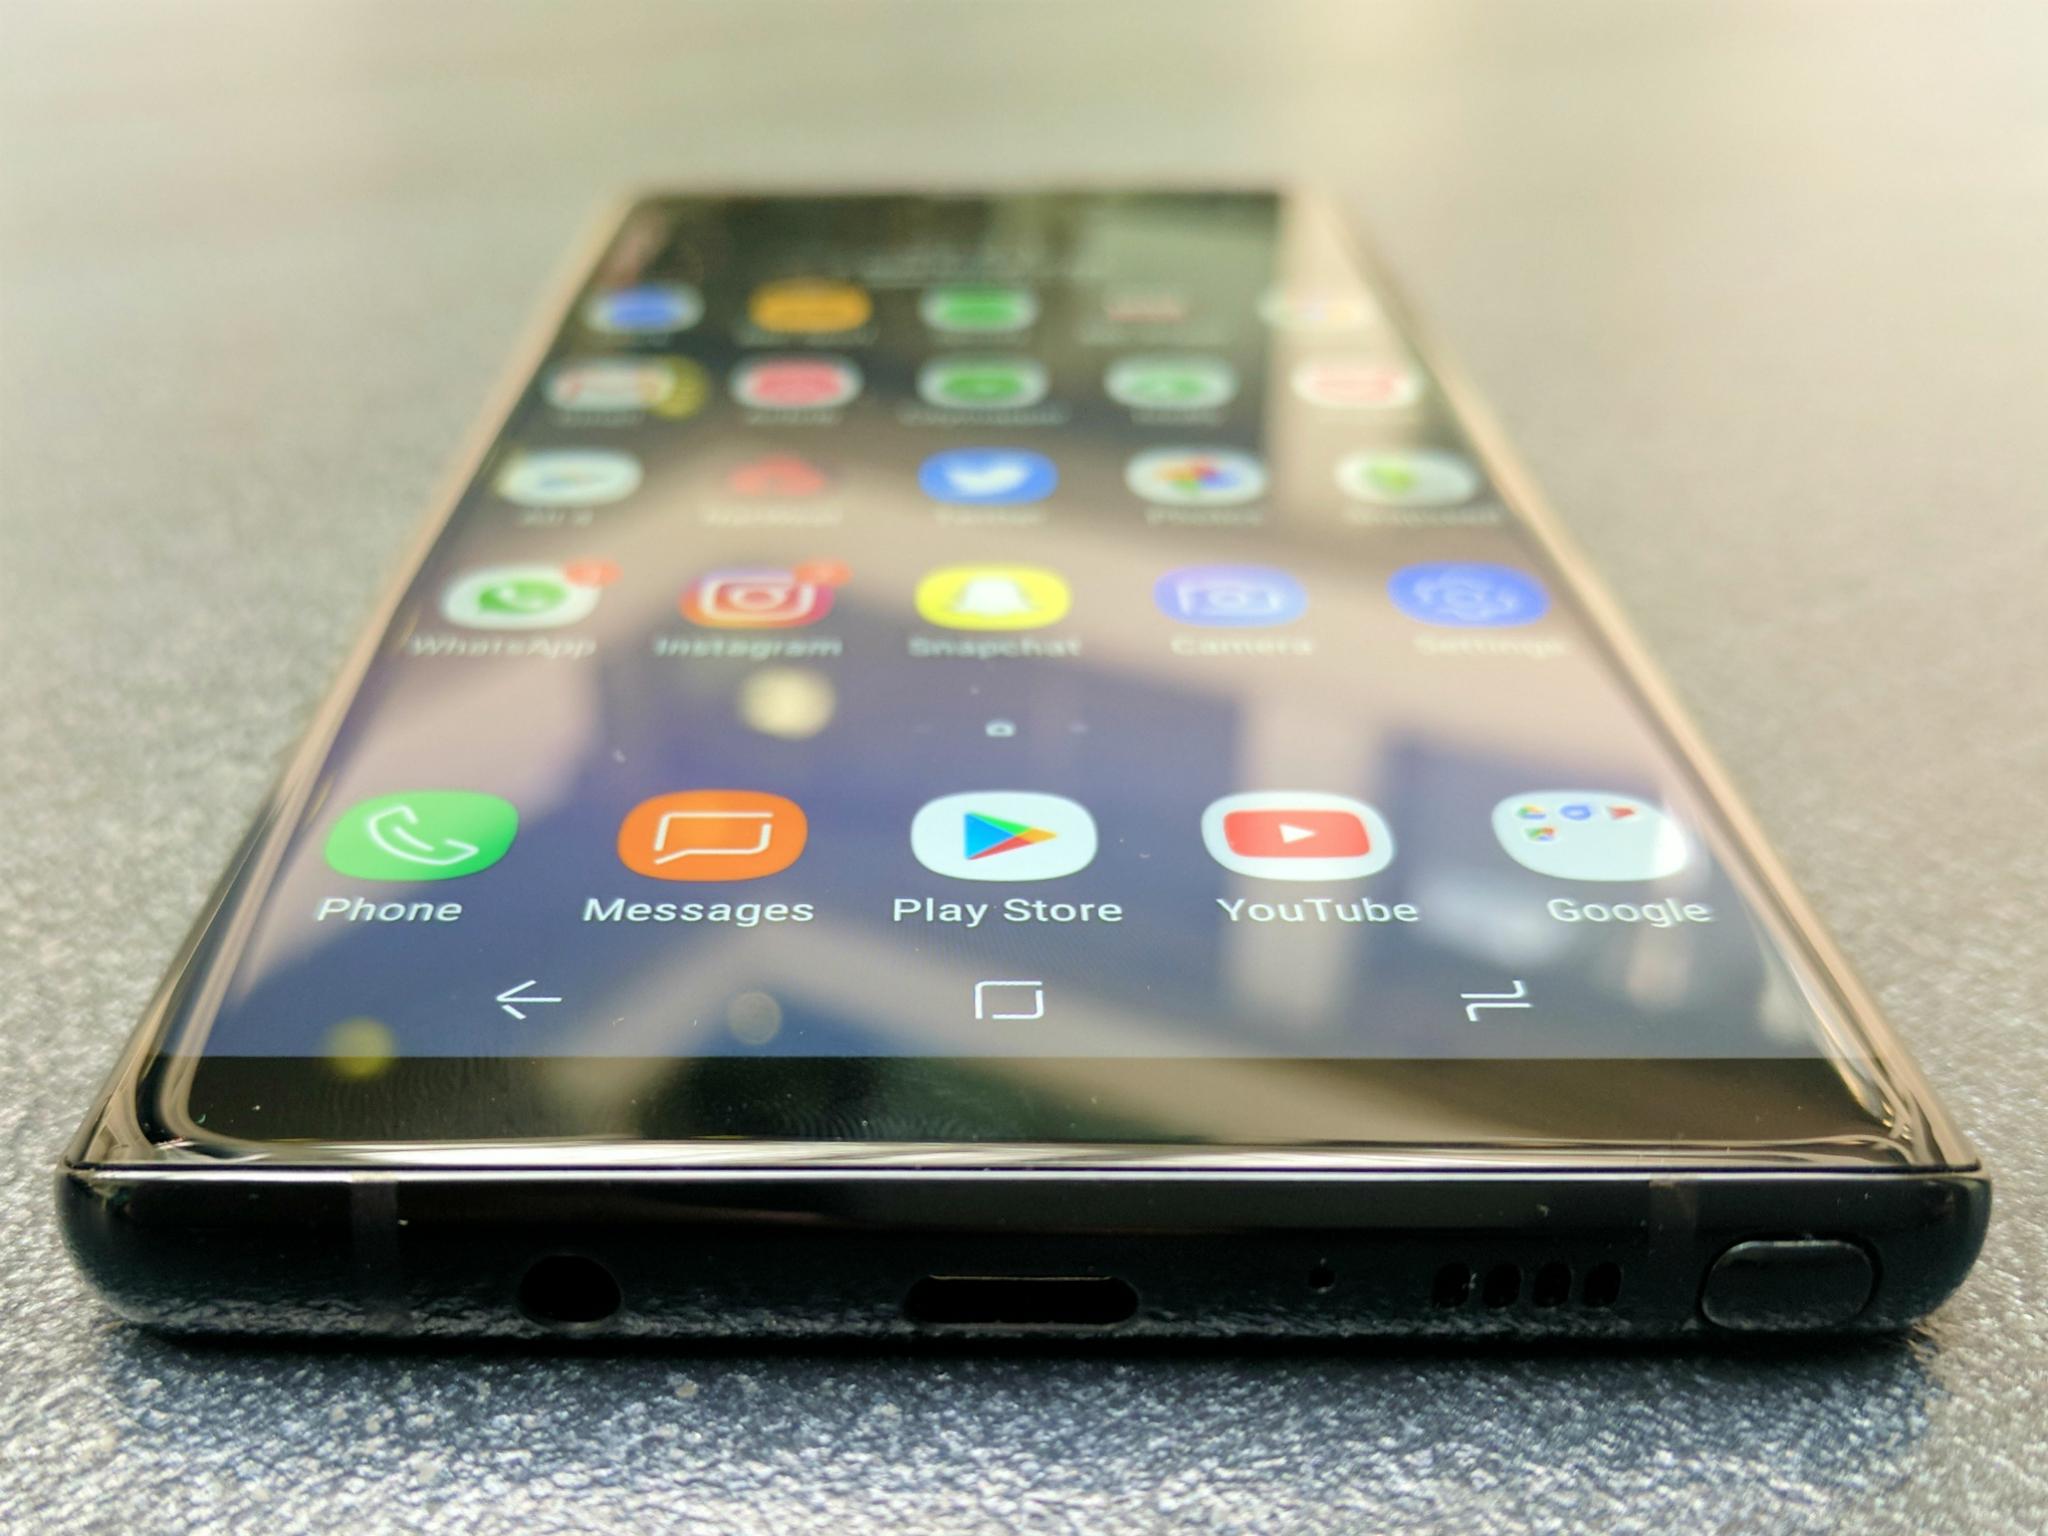 Samsung Galaxy Note 8: Phones completely dying after battery runs flat, customers say